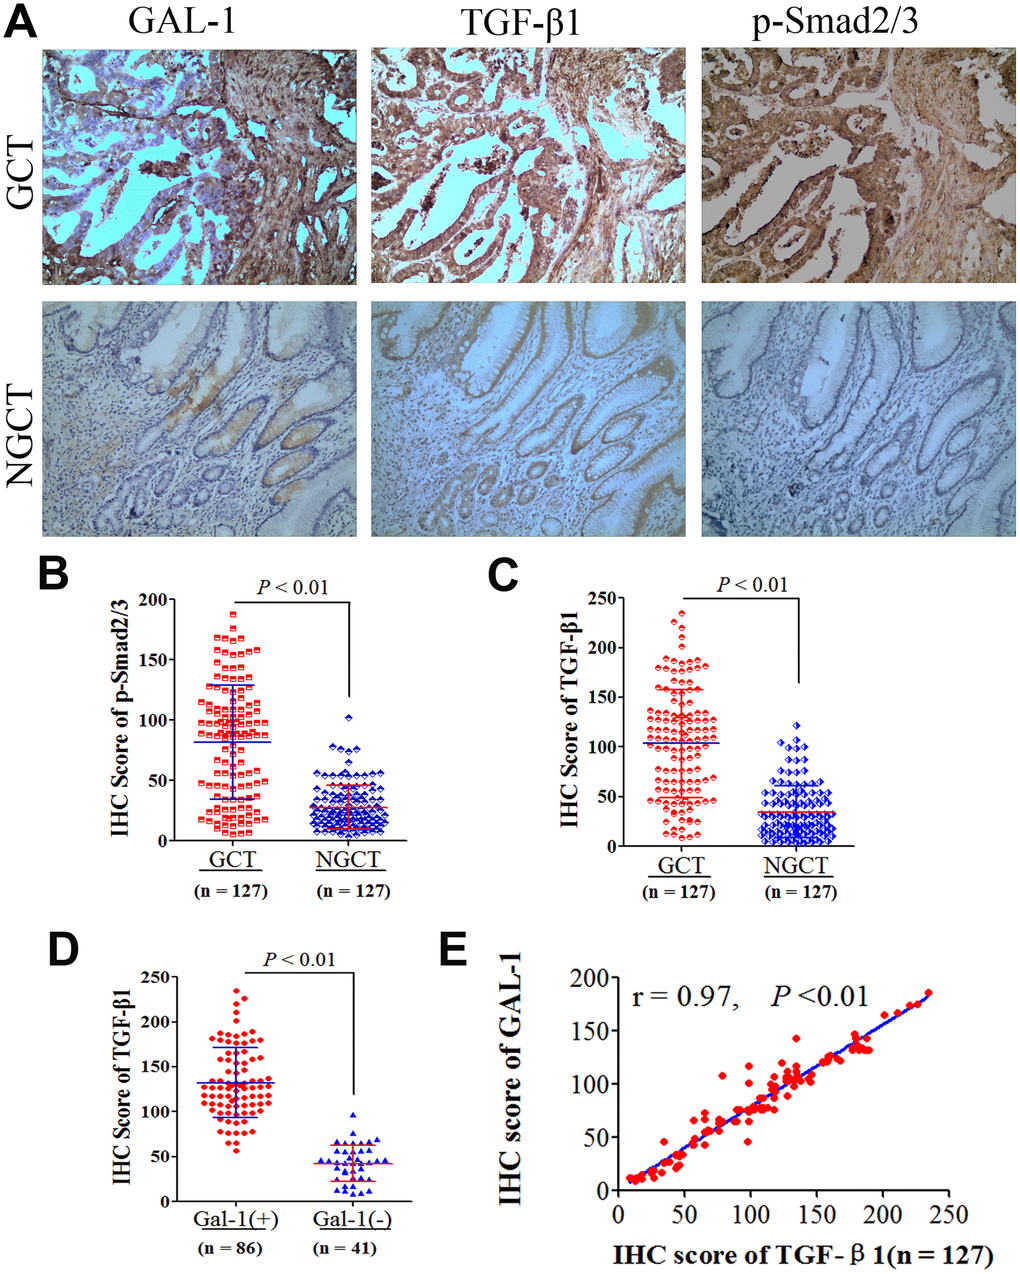 GAL-1/LGALS1 activates TGF-β/Smad signaling pathways in GC tissues. (A) Representative images of IHC for GAL-1, TGF-β1, and p-Smad2/3 protein levels in GCT and NGCT. Magnification: ×400. (B, C) Significant differences in TGF-β1 and p-Smad2/3 levels were observed between GCT and NGCT (all P D) The TGF-β1 IHC scores in GAL-1-positive GCT were significantly higher than those in GAL-1-negative GCT (P E) The TGF-β1 IHC scores correlate positively with the GAL-1 IHC scores in GC tissues (r = 0.97; P 